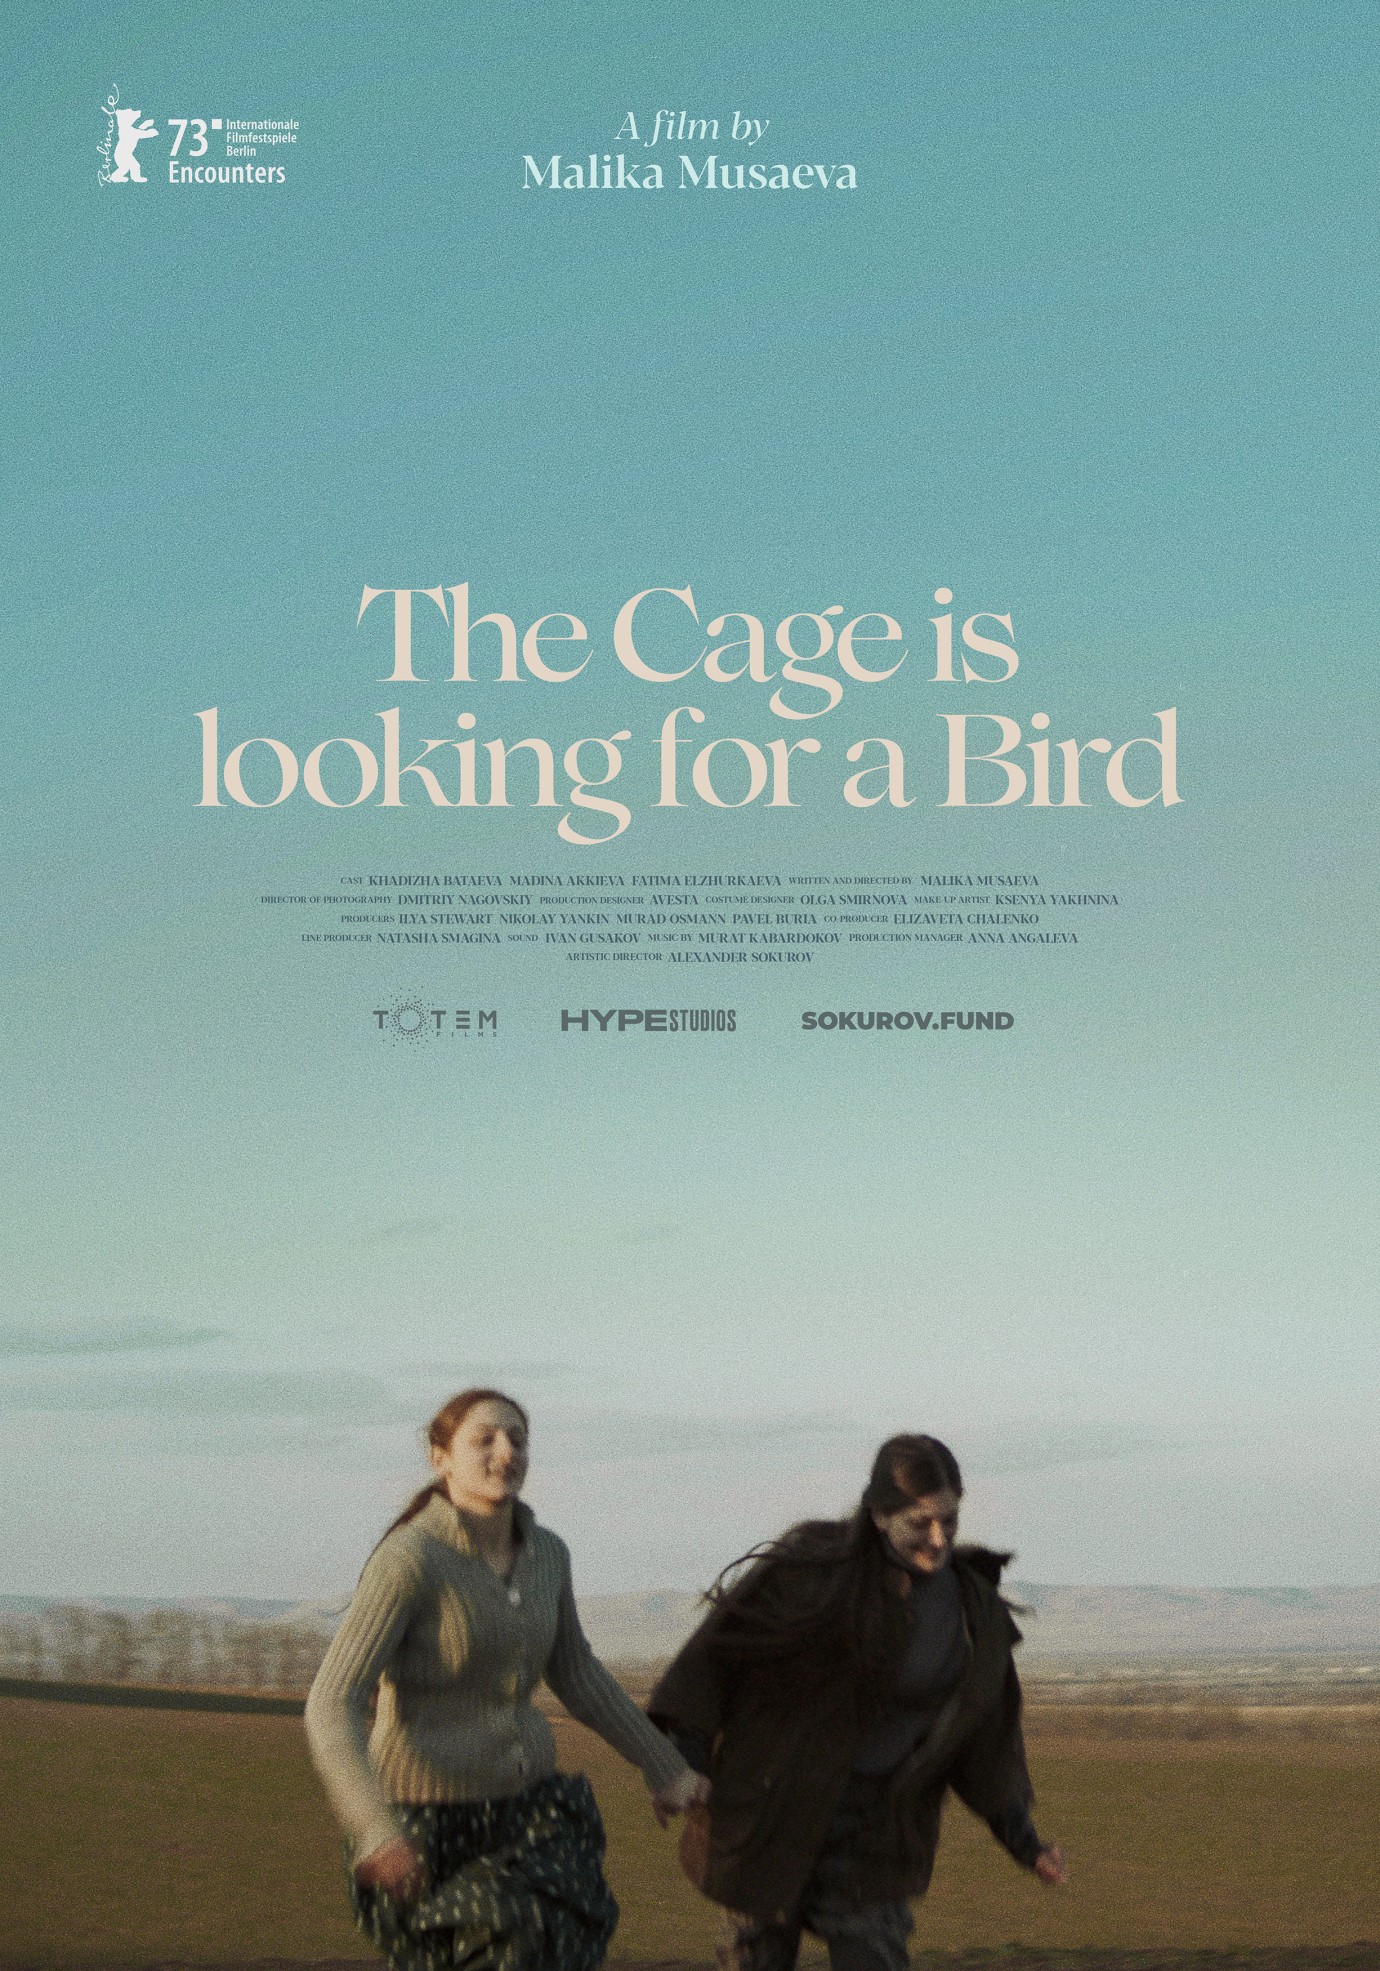 Berlinale | Programme | Programme - Kletka ishet ptitsu | The Cage Is  Looking for a Bird